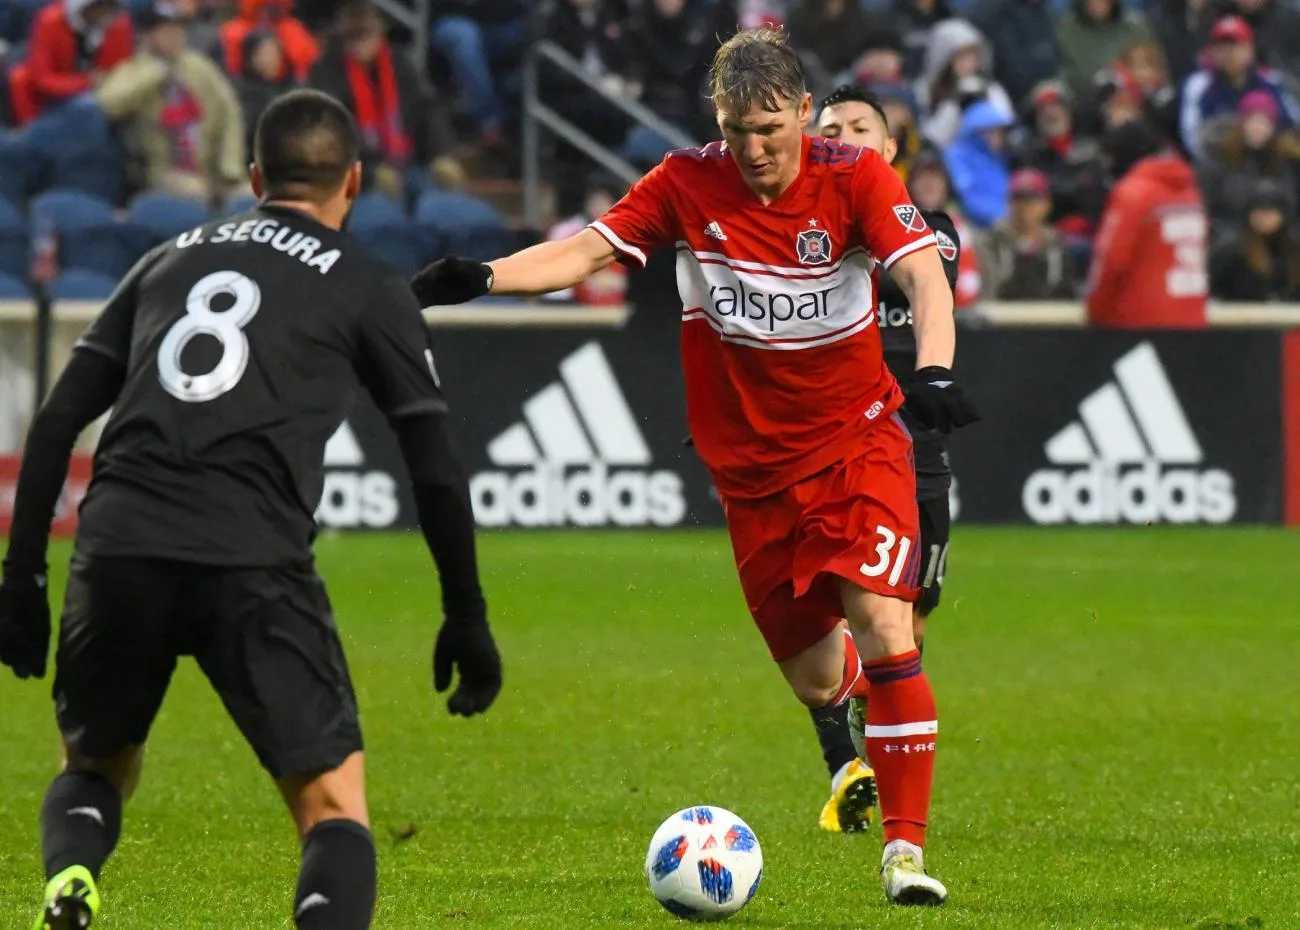 Chicago Fire at DC United 5/29/19 - MLS Picks & Predictions